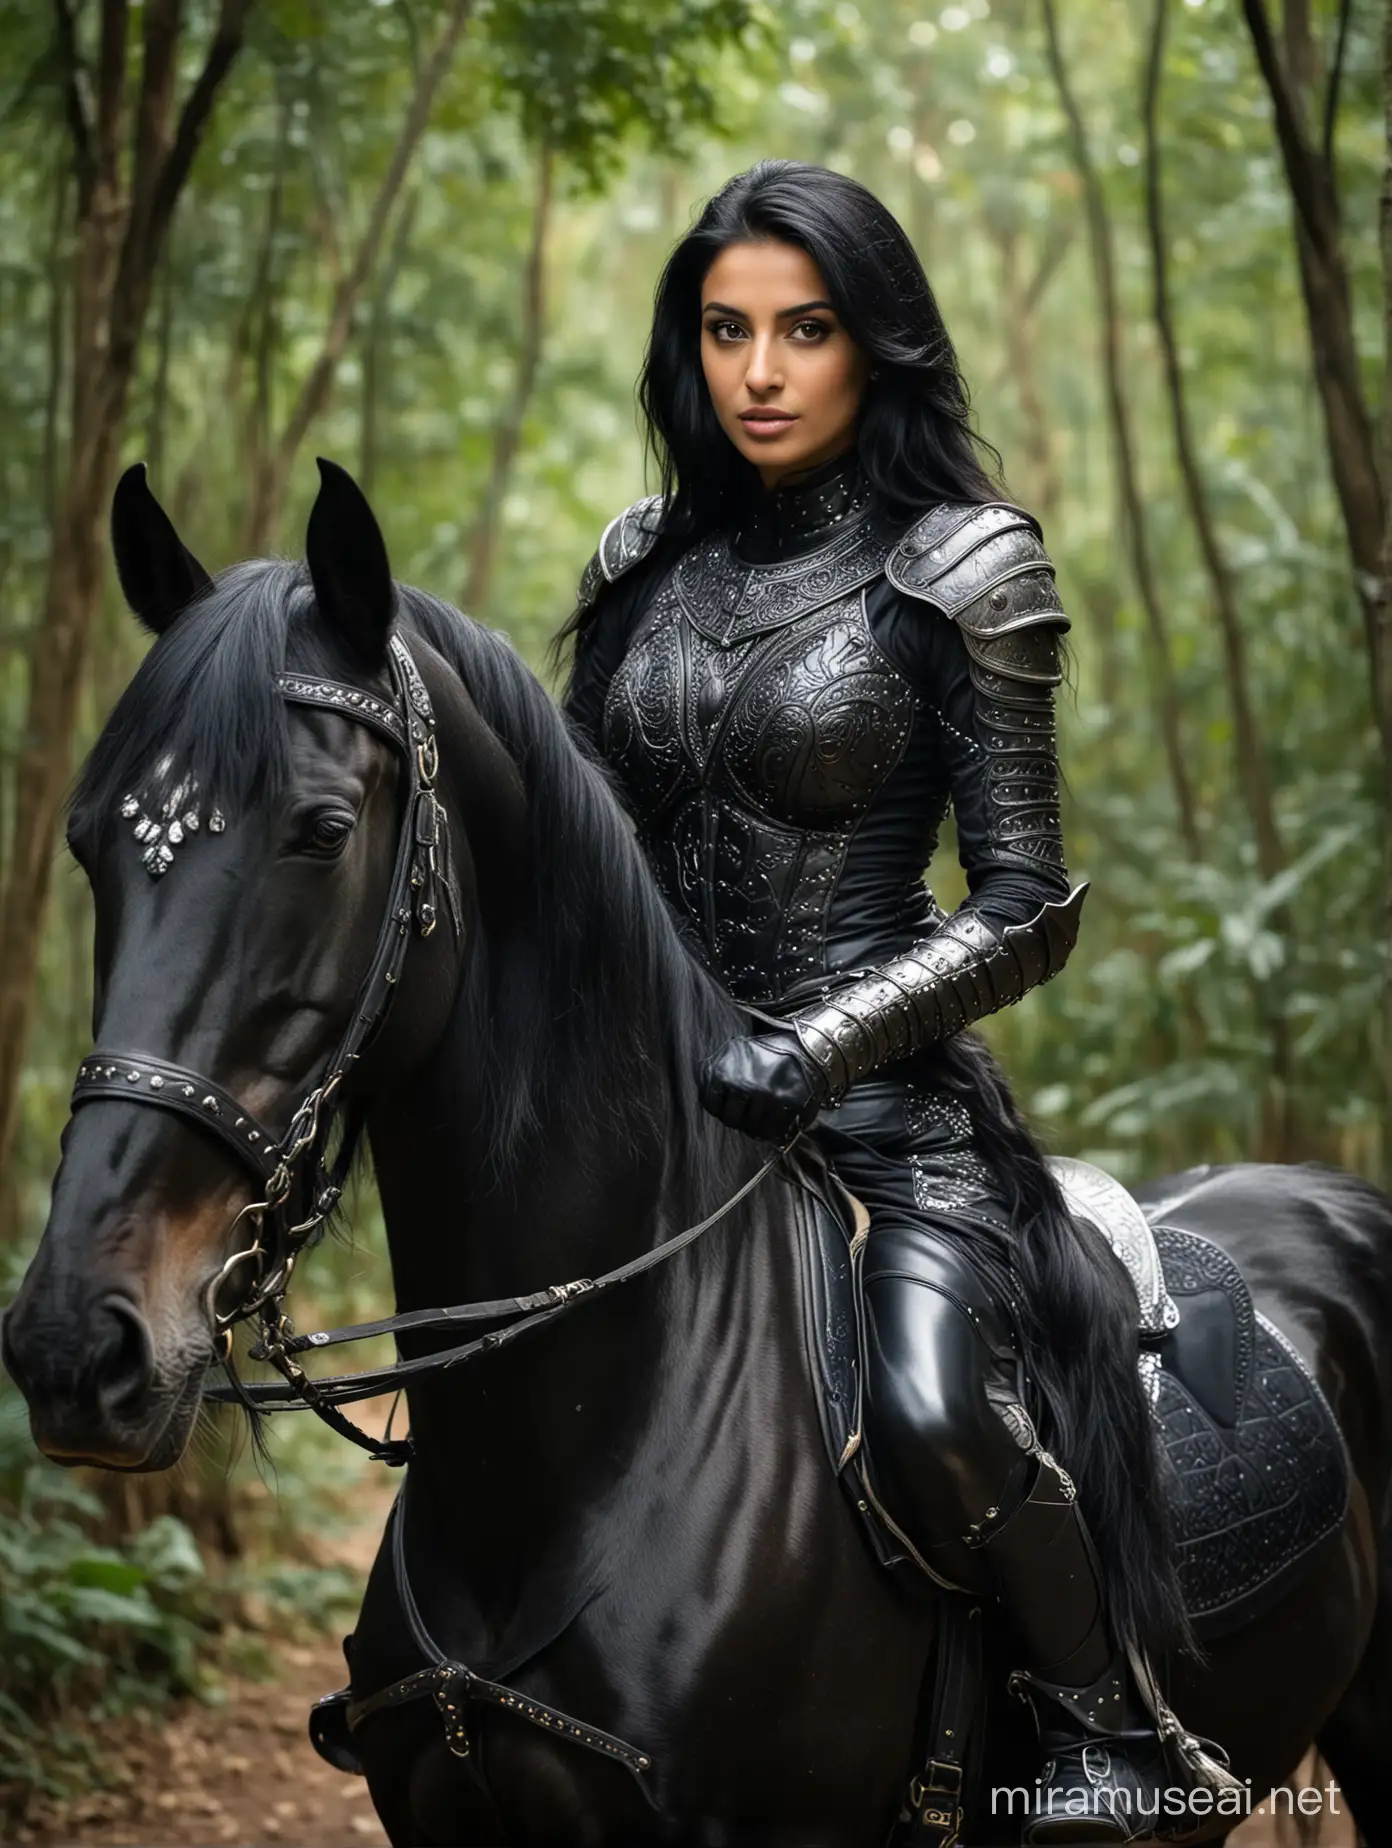 beautiful Arab woman dressed in black knight armor, in an Indian rainforest, she is about 21 years old, long black hair, beautiful nose, attractive cheek bones, arched eyebrows, she is riding a black horse